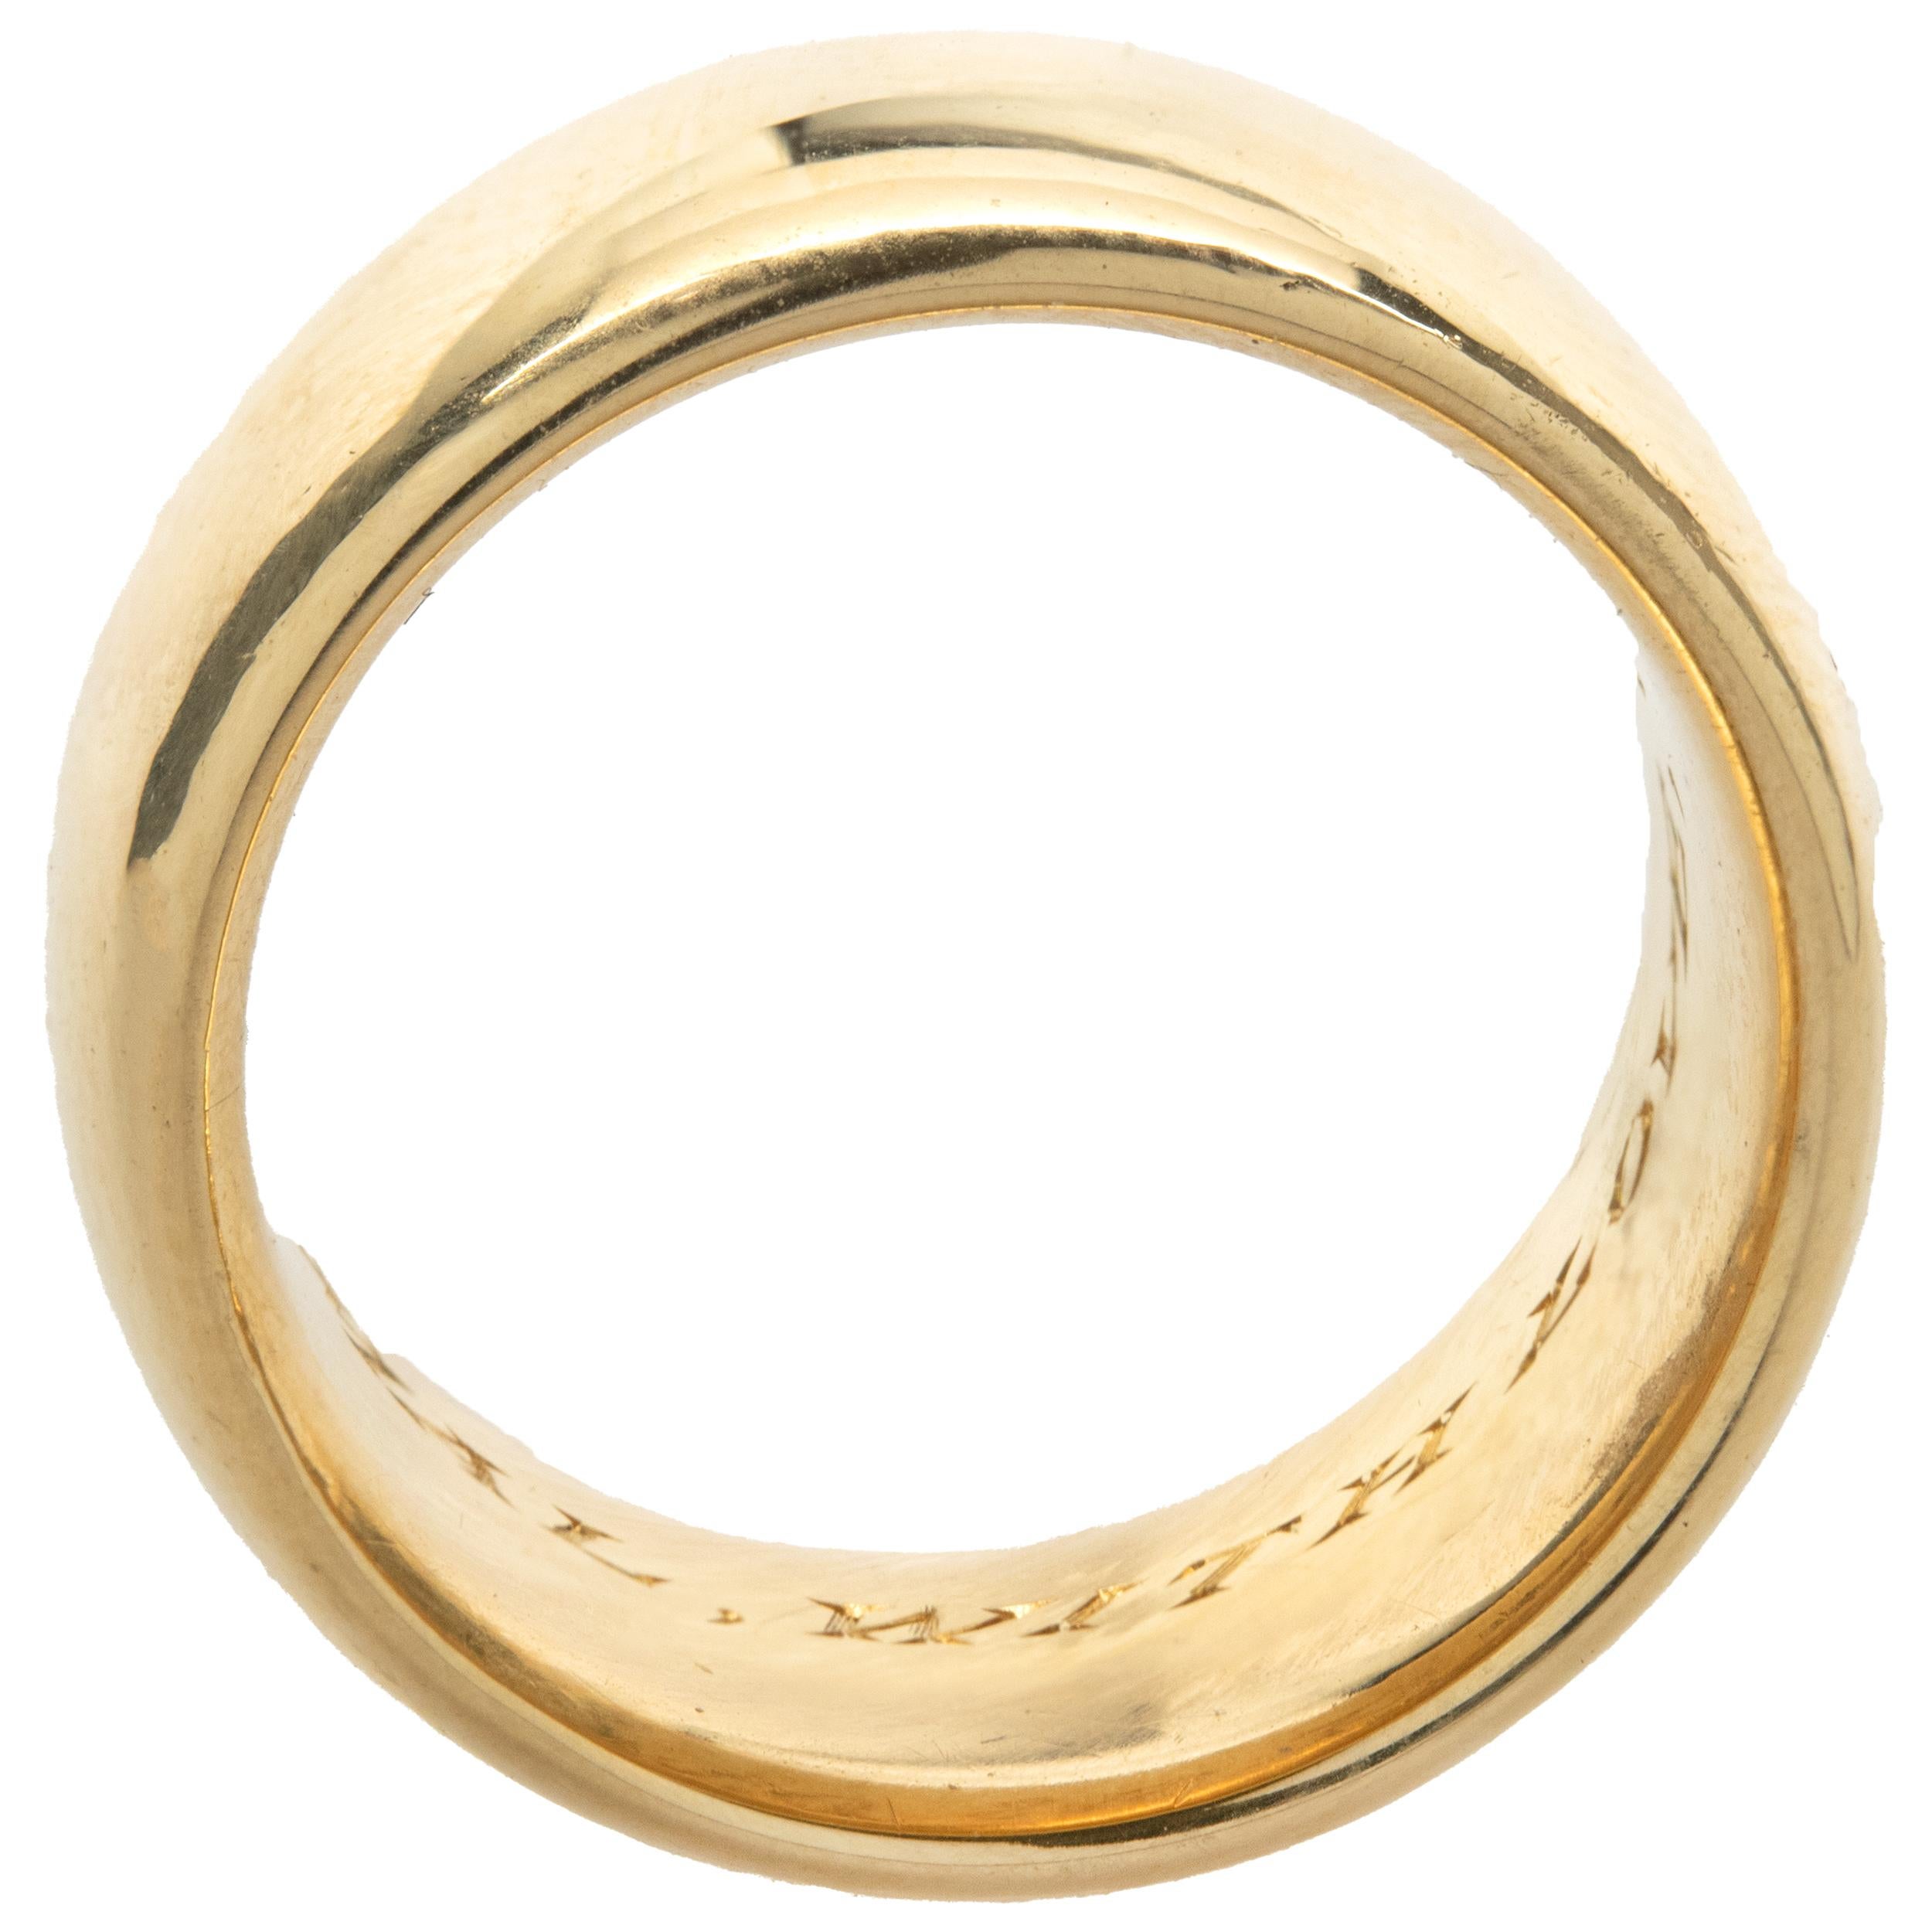 Cartier 18 Karat Yellow Gold 10MM Band

Designer: Cartier
Material: 18K yellow gold
Dimensions: ring measures 10MM wide
Size: 5.5 (complimentary sizing available)
Serial # 37XXX
Weight: 15.02g